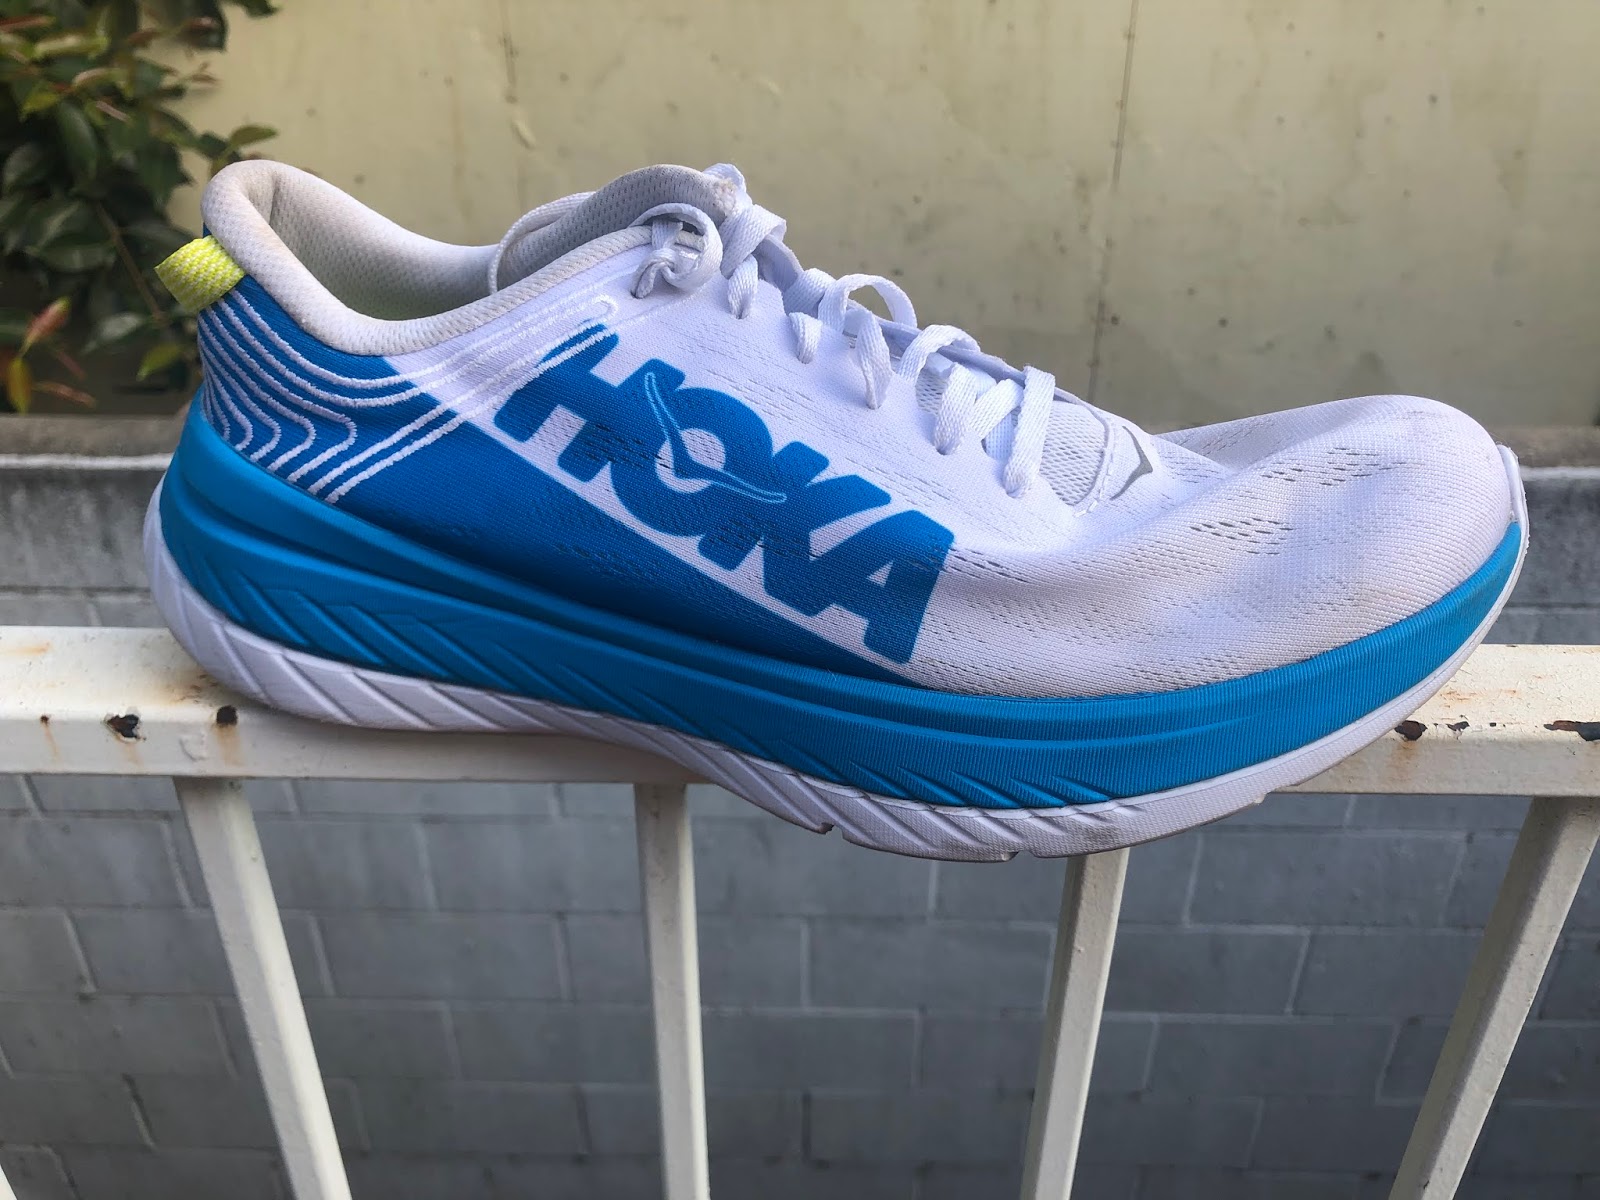 Hoka One One Carbon X Review - DOCTORS OF RUNNING